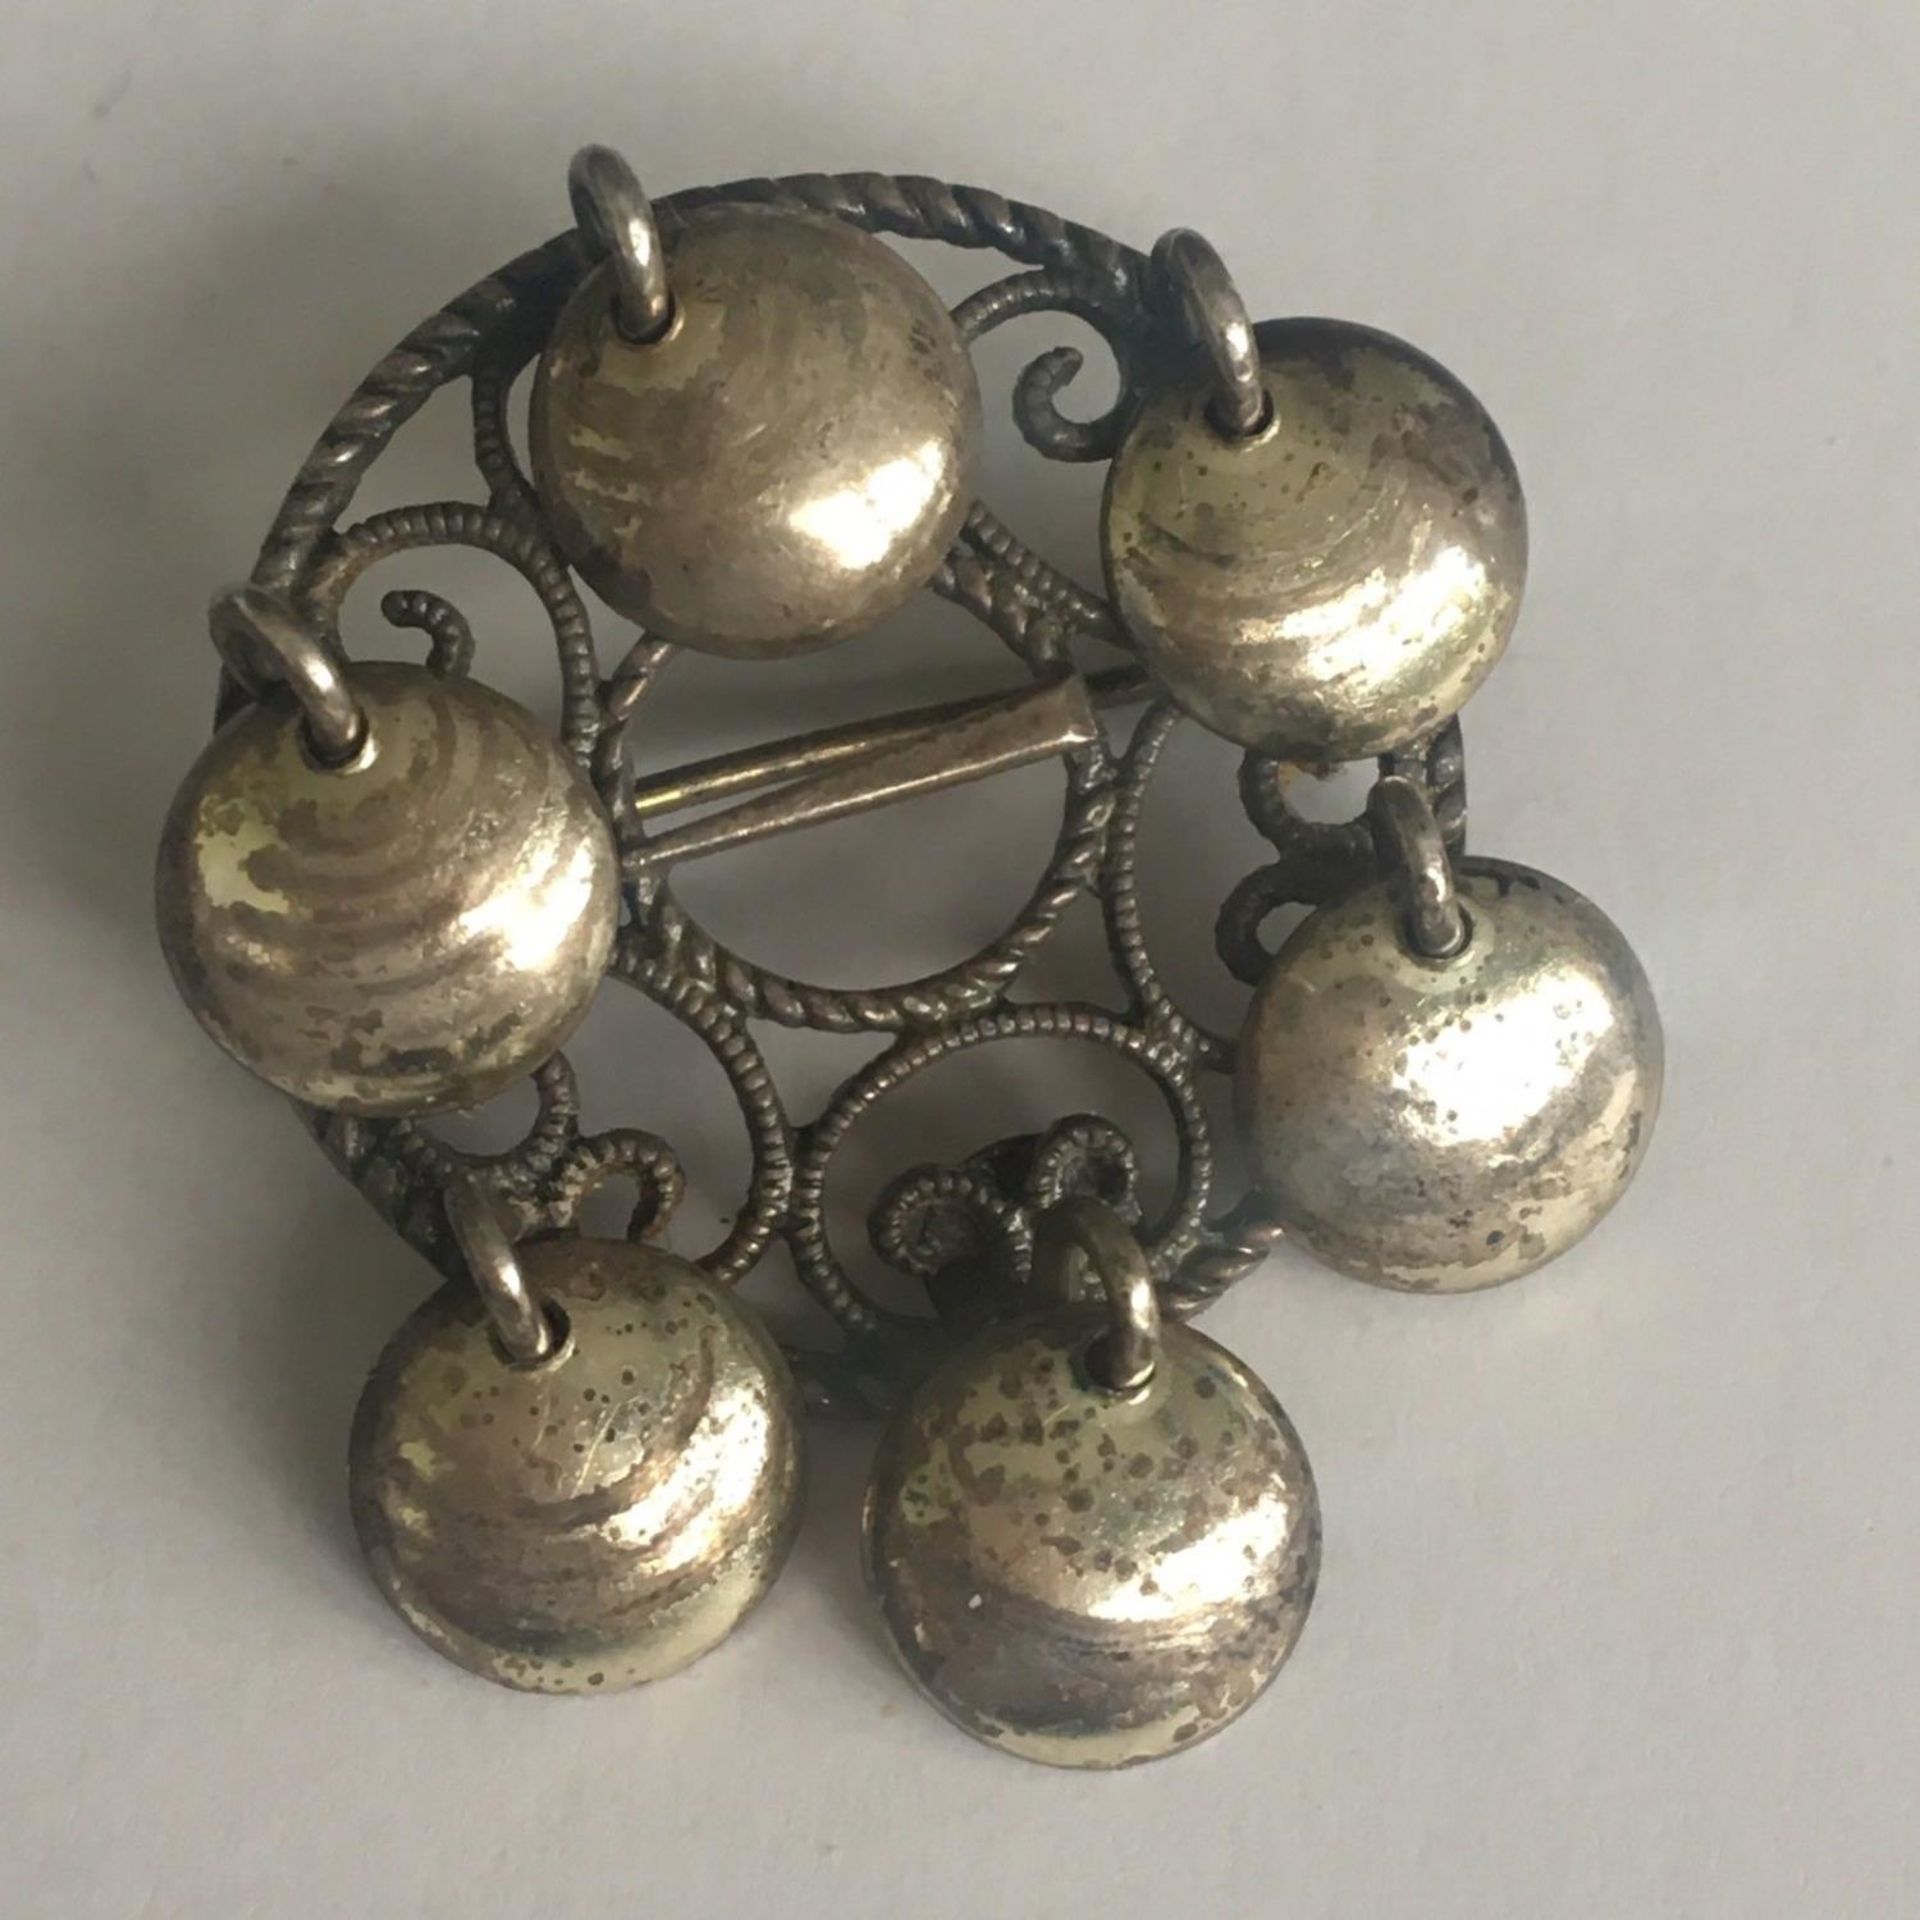 A Norwegian Silver Traditional Solje Brooch Signed and Stamped Sterling